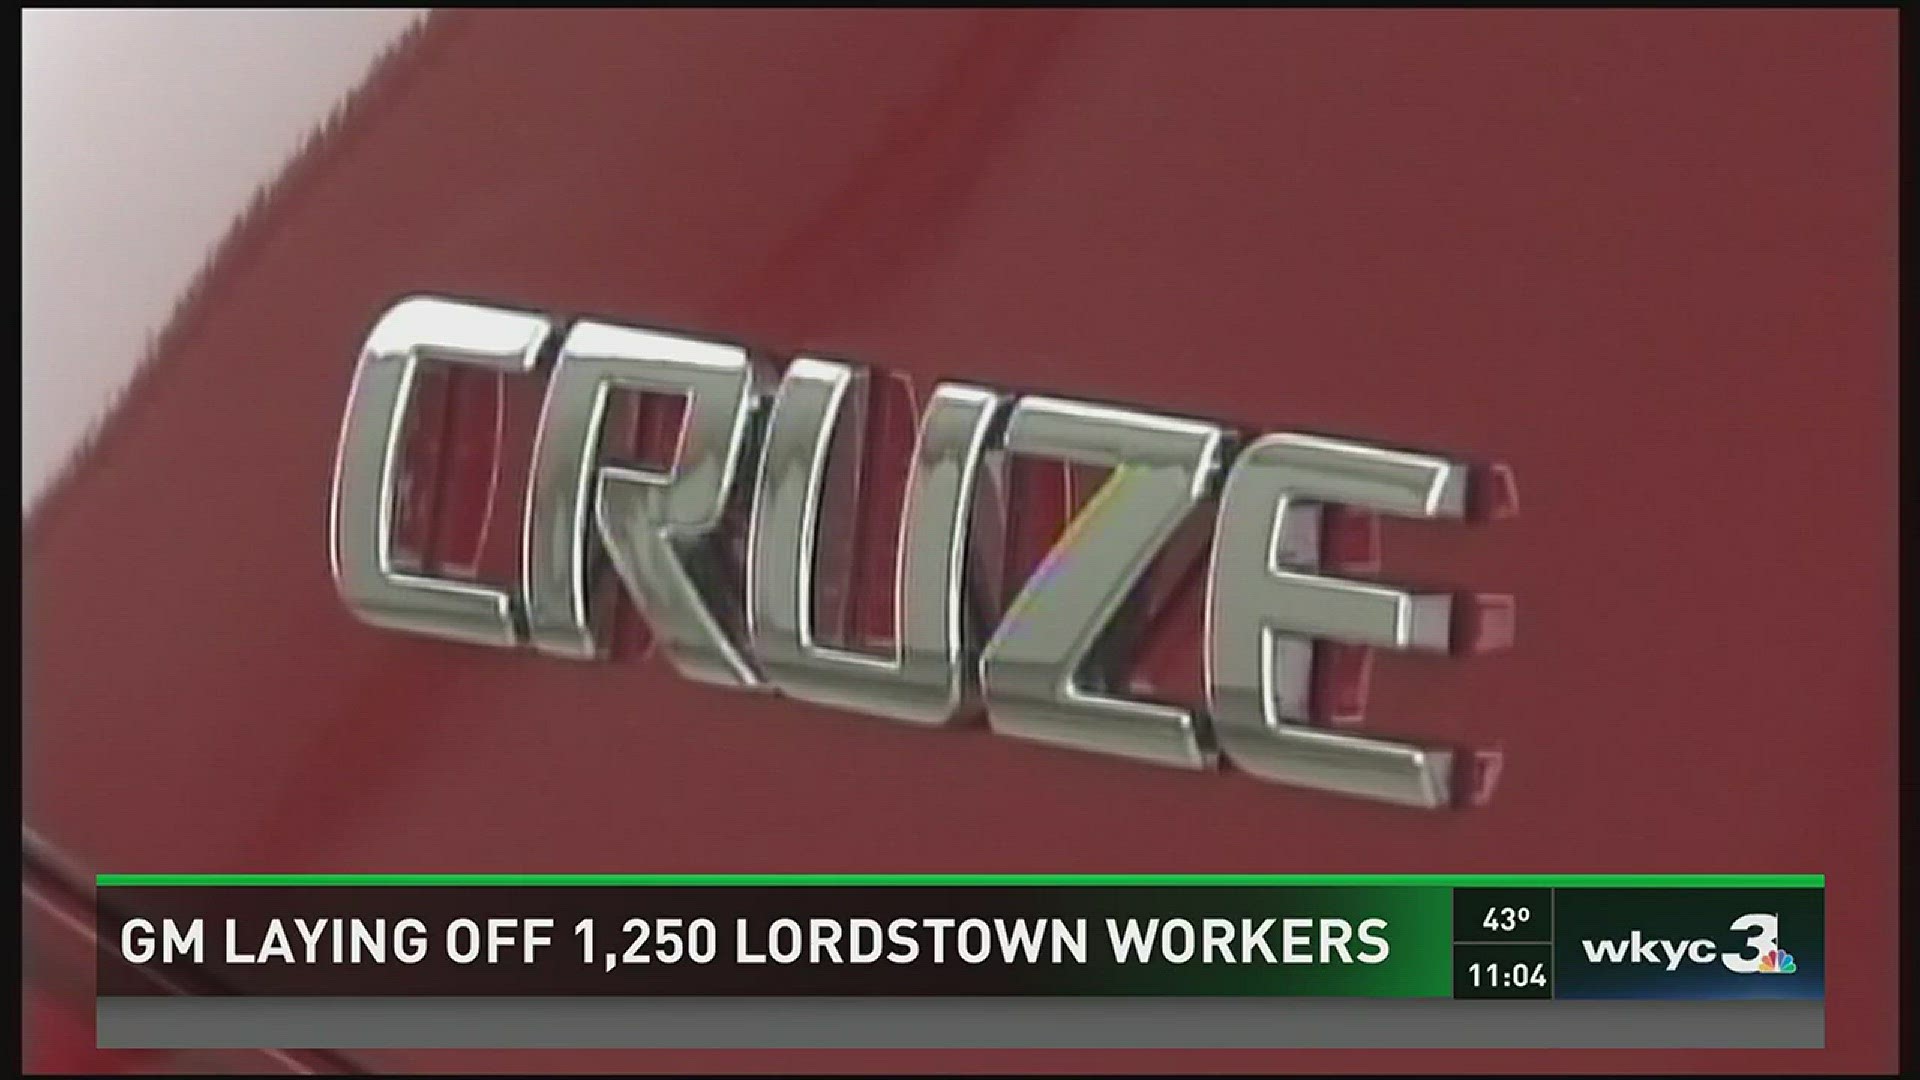 GM laying off 1,250 Lordstown workers